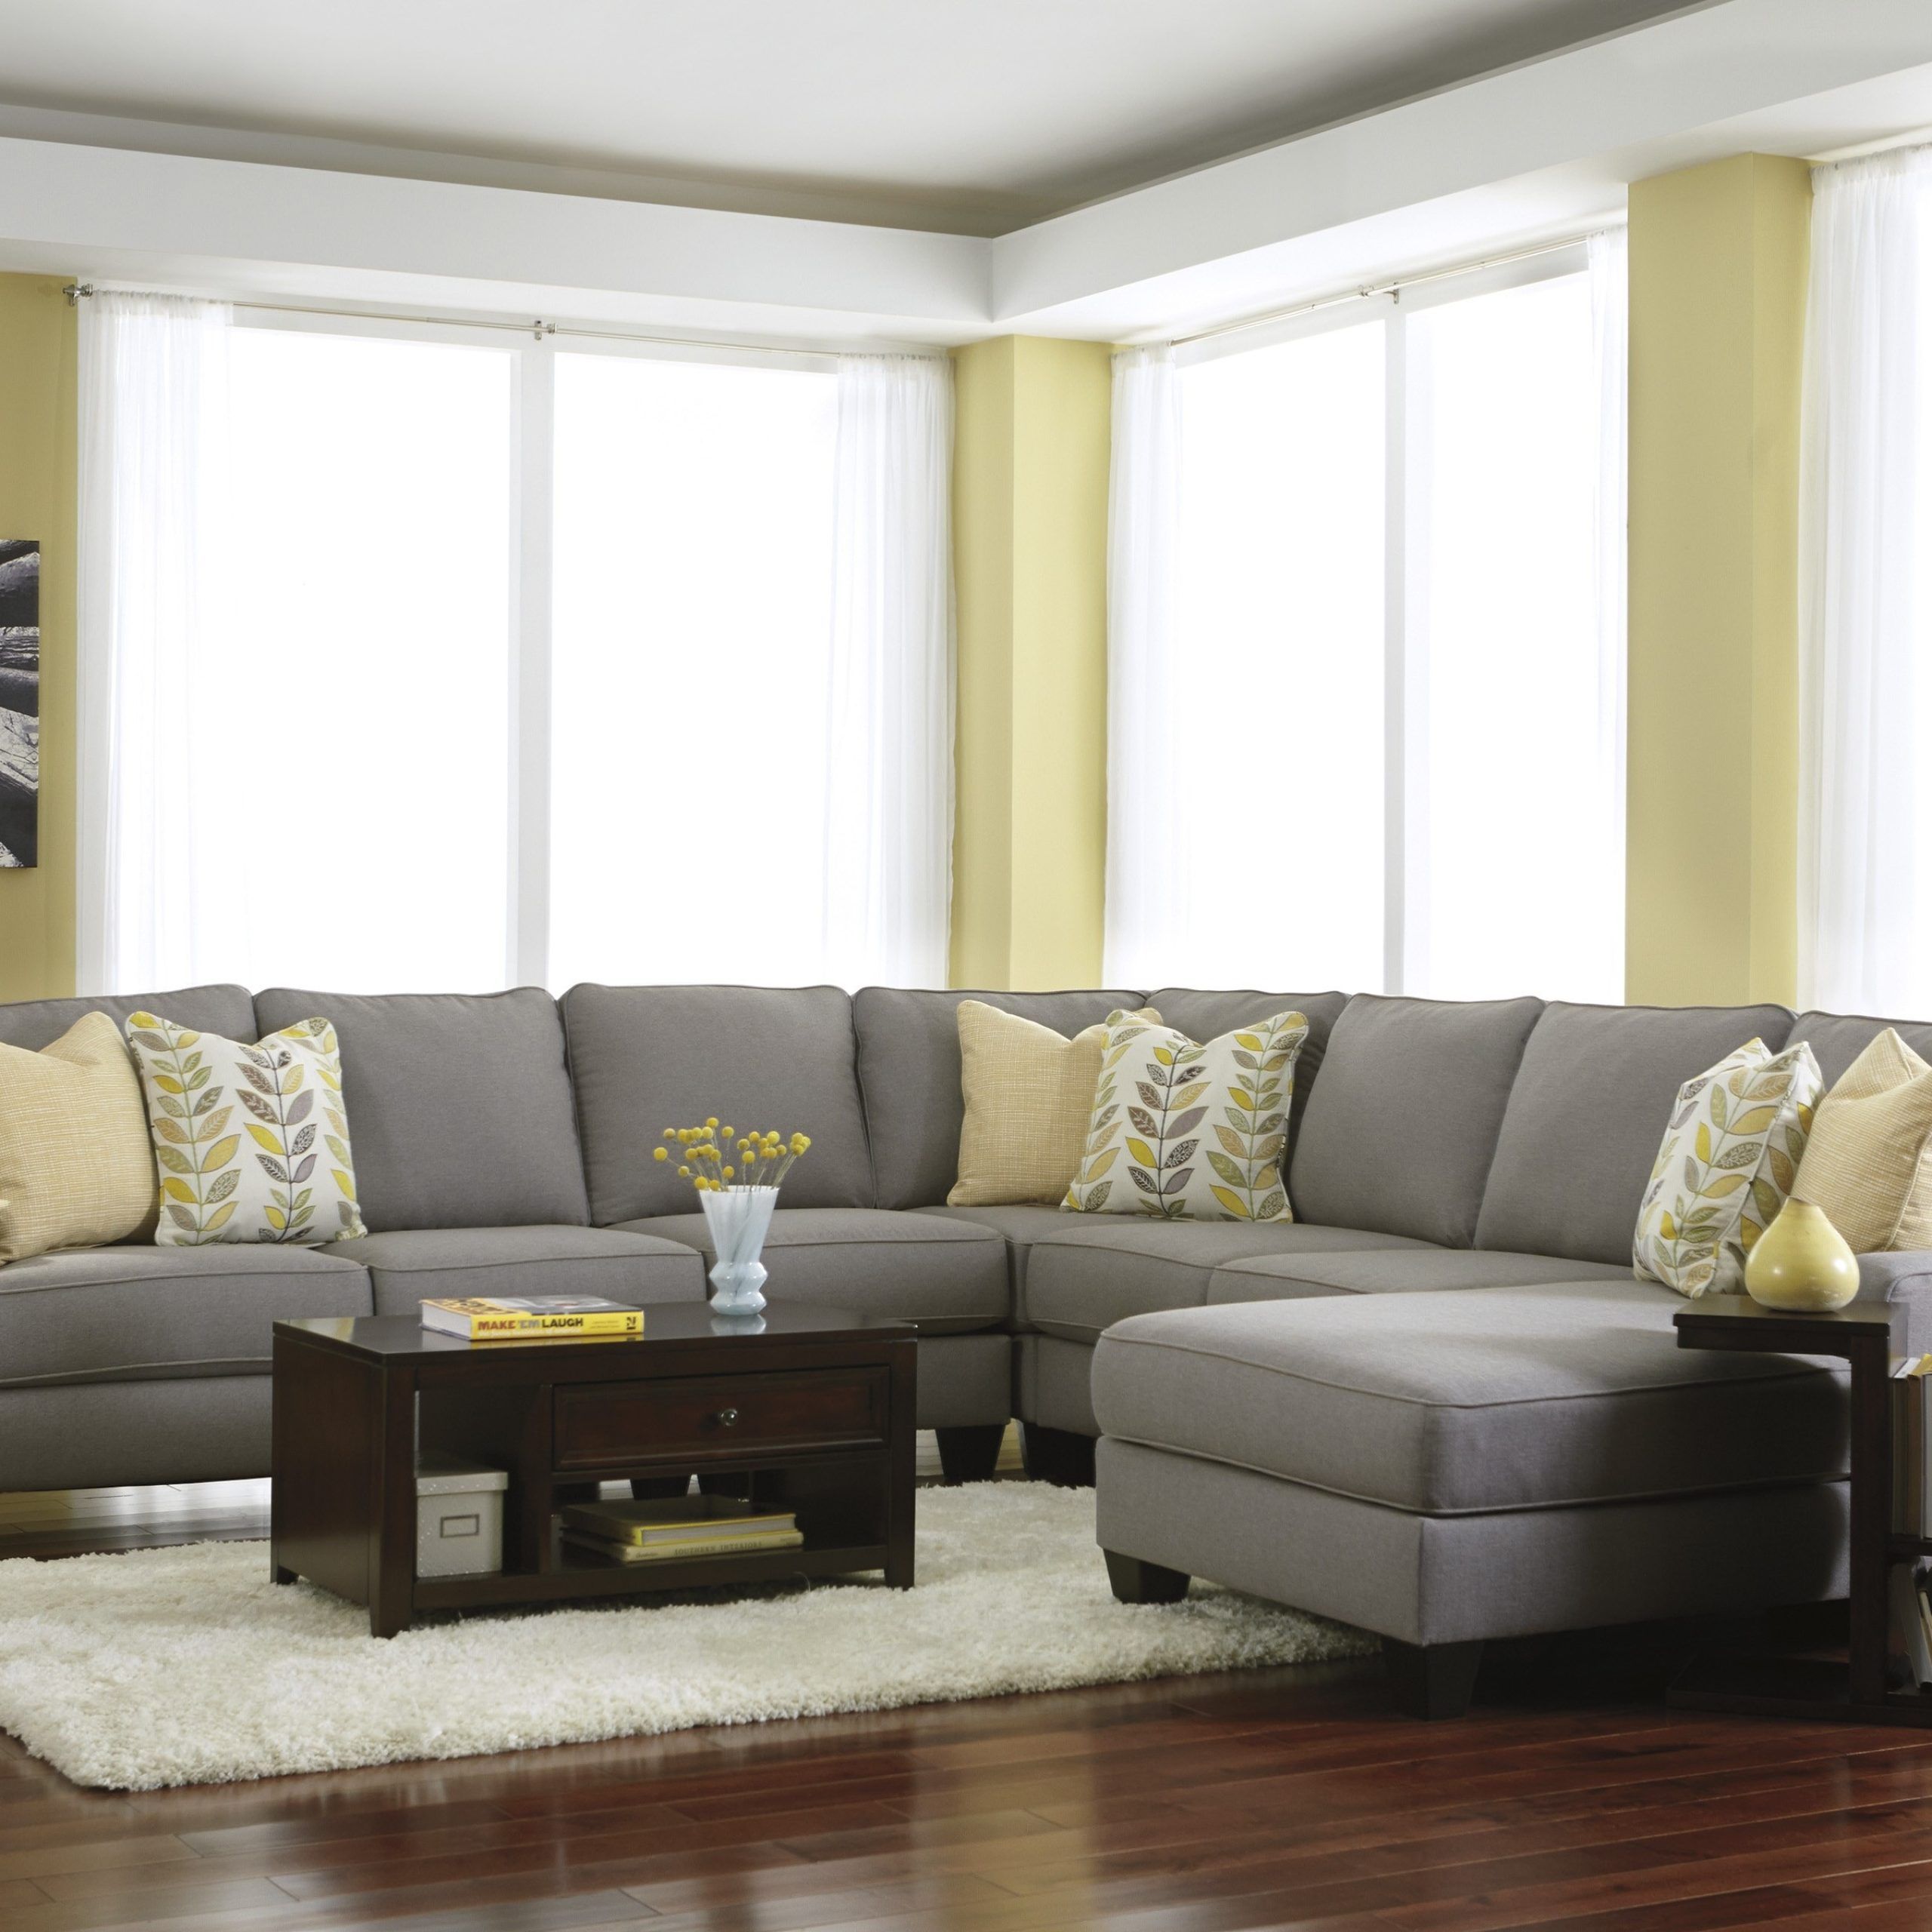 Sofas For Living Rooms With Regard To Well Liked Living Room Ideas With Sectionals Sofa For Small Living Room (View 3 of 15)